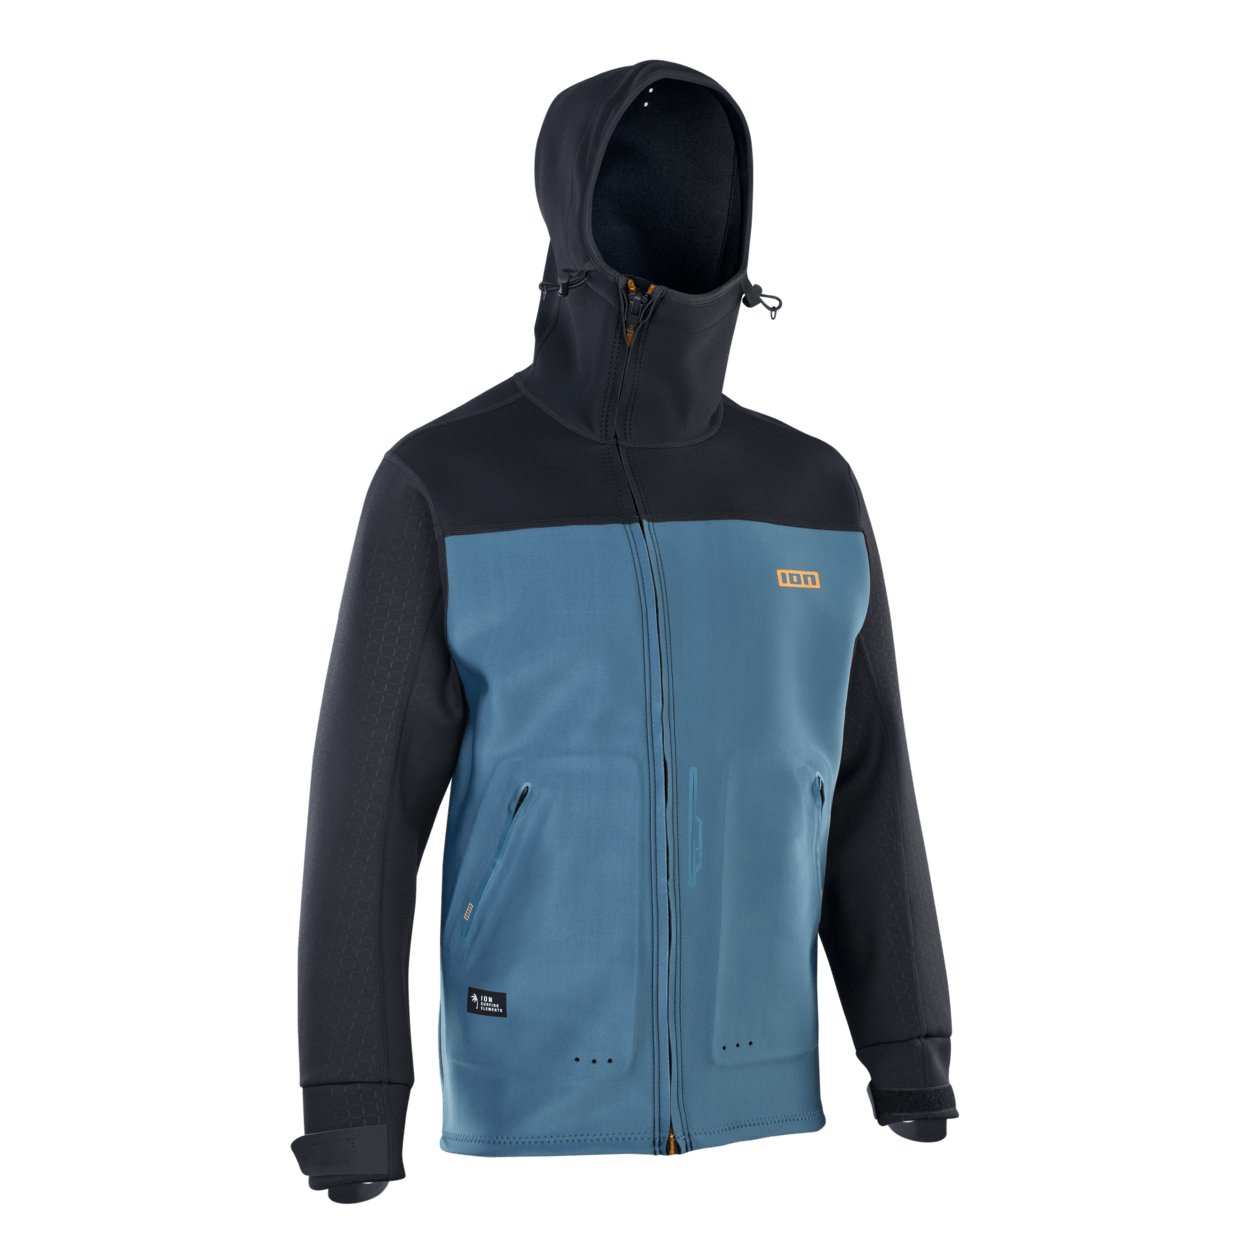 ION Neo Shelter Jacket Amp men 2022 - Worthing Watersports - 9010583052700 - Tops - ION Water